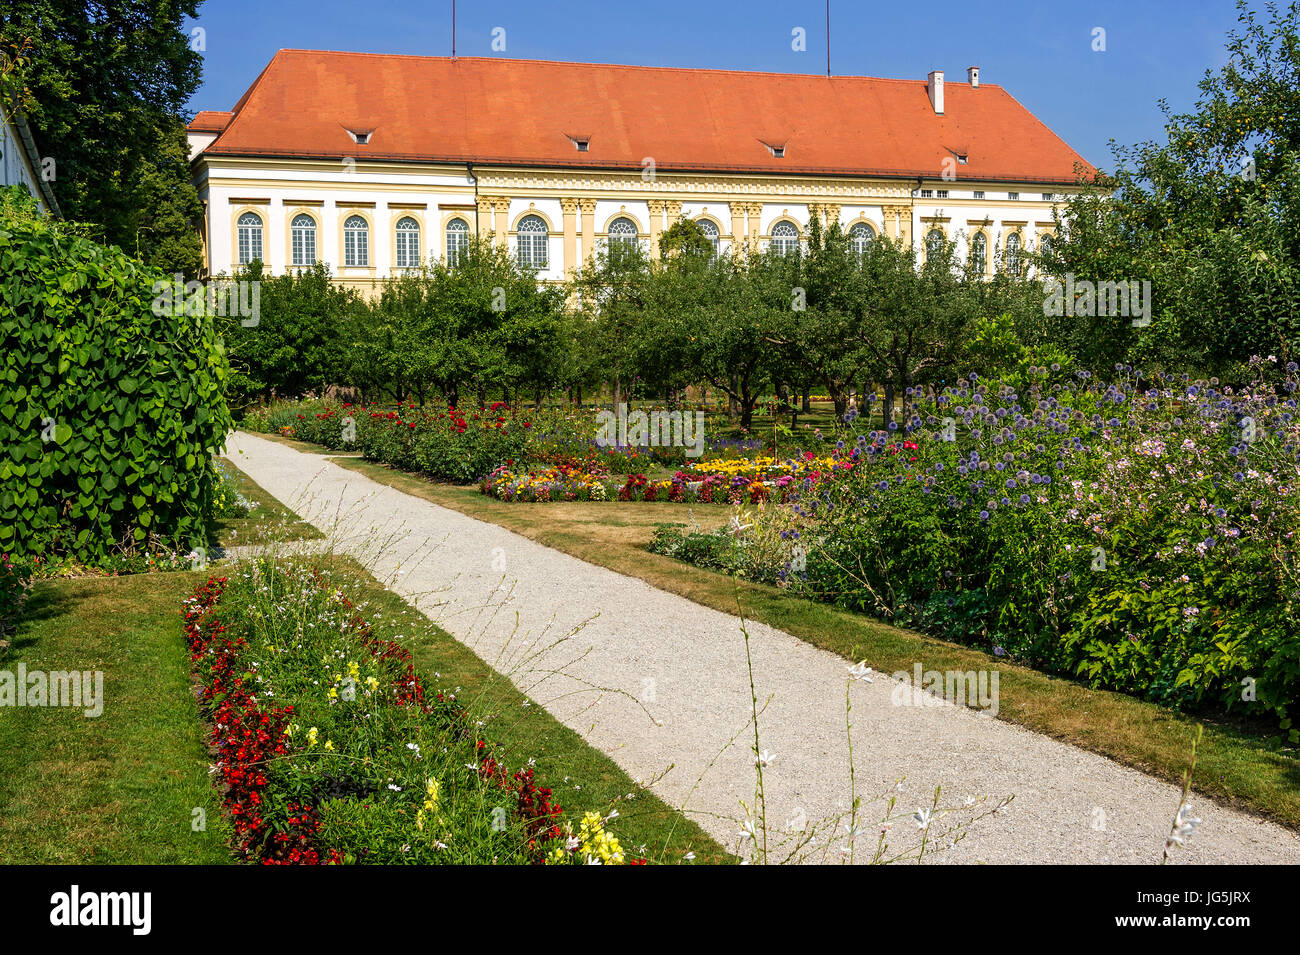 Colorful flower beds and historical orchard, court garden, palace garden, Dachau castle, Dachau, Upper Bavaria, Bavaria, Germany Stock Photo